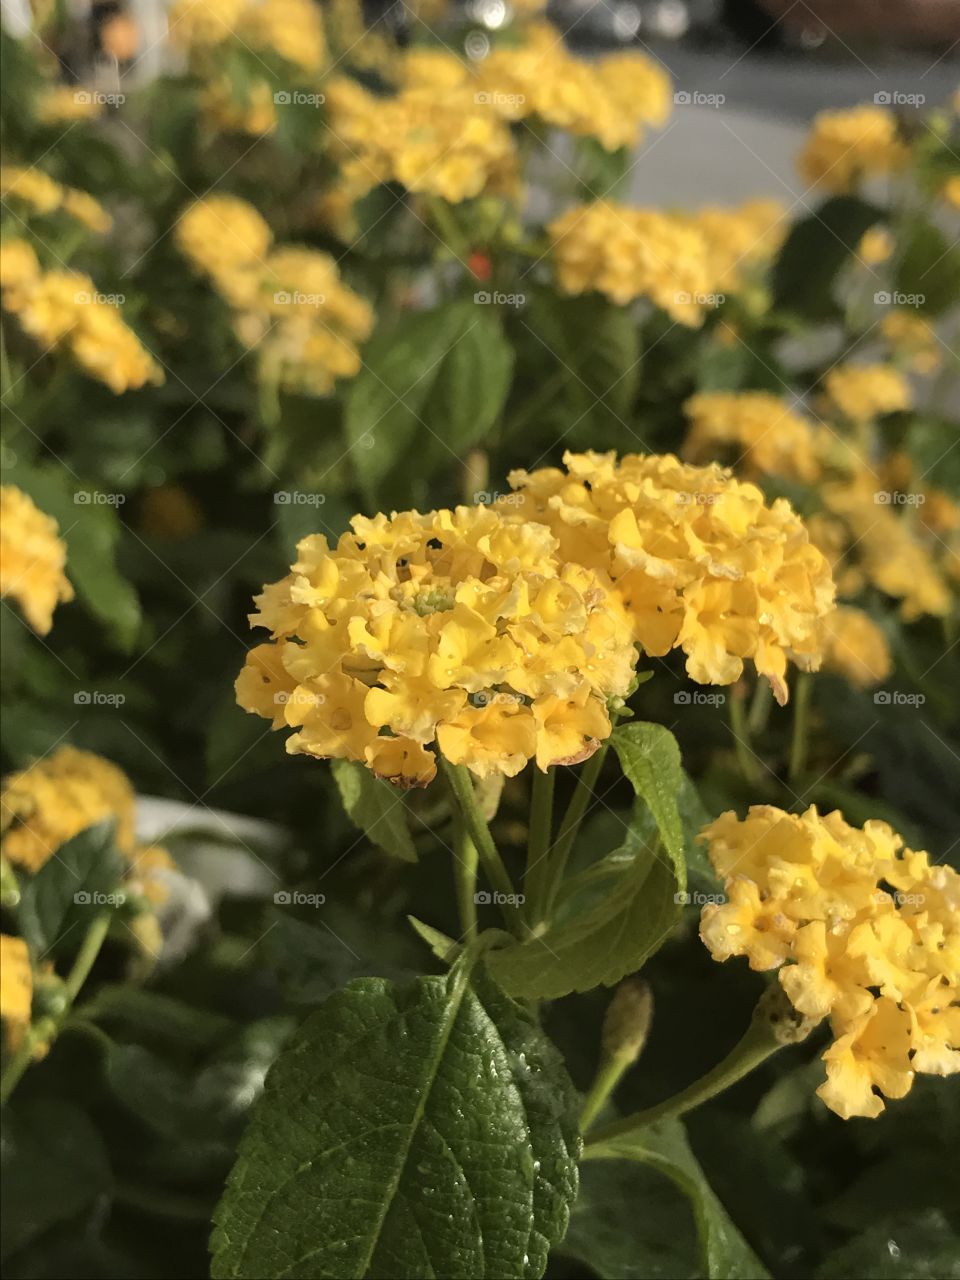 A bunch of yellow flowers after a brief shower